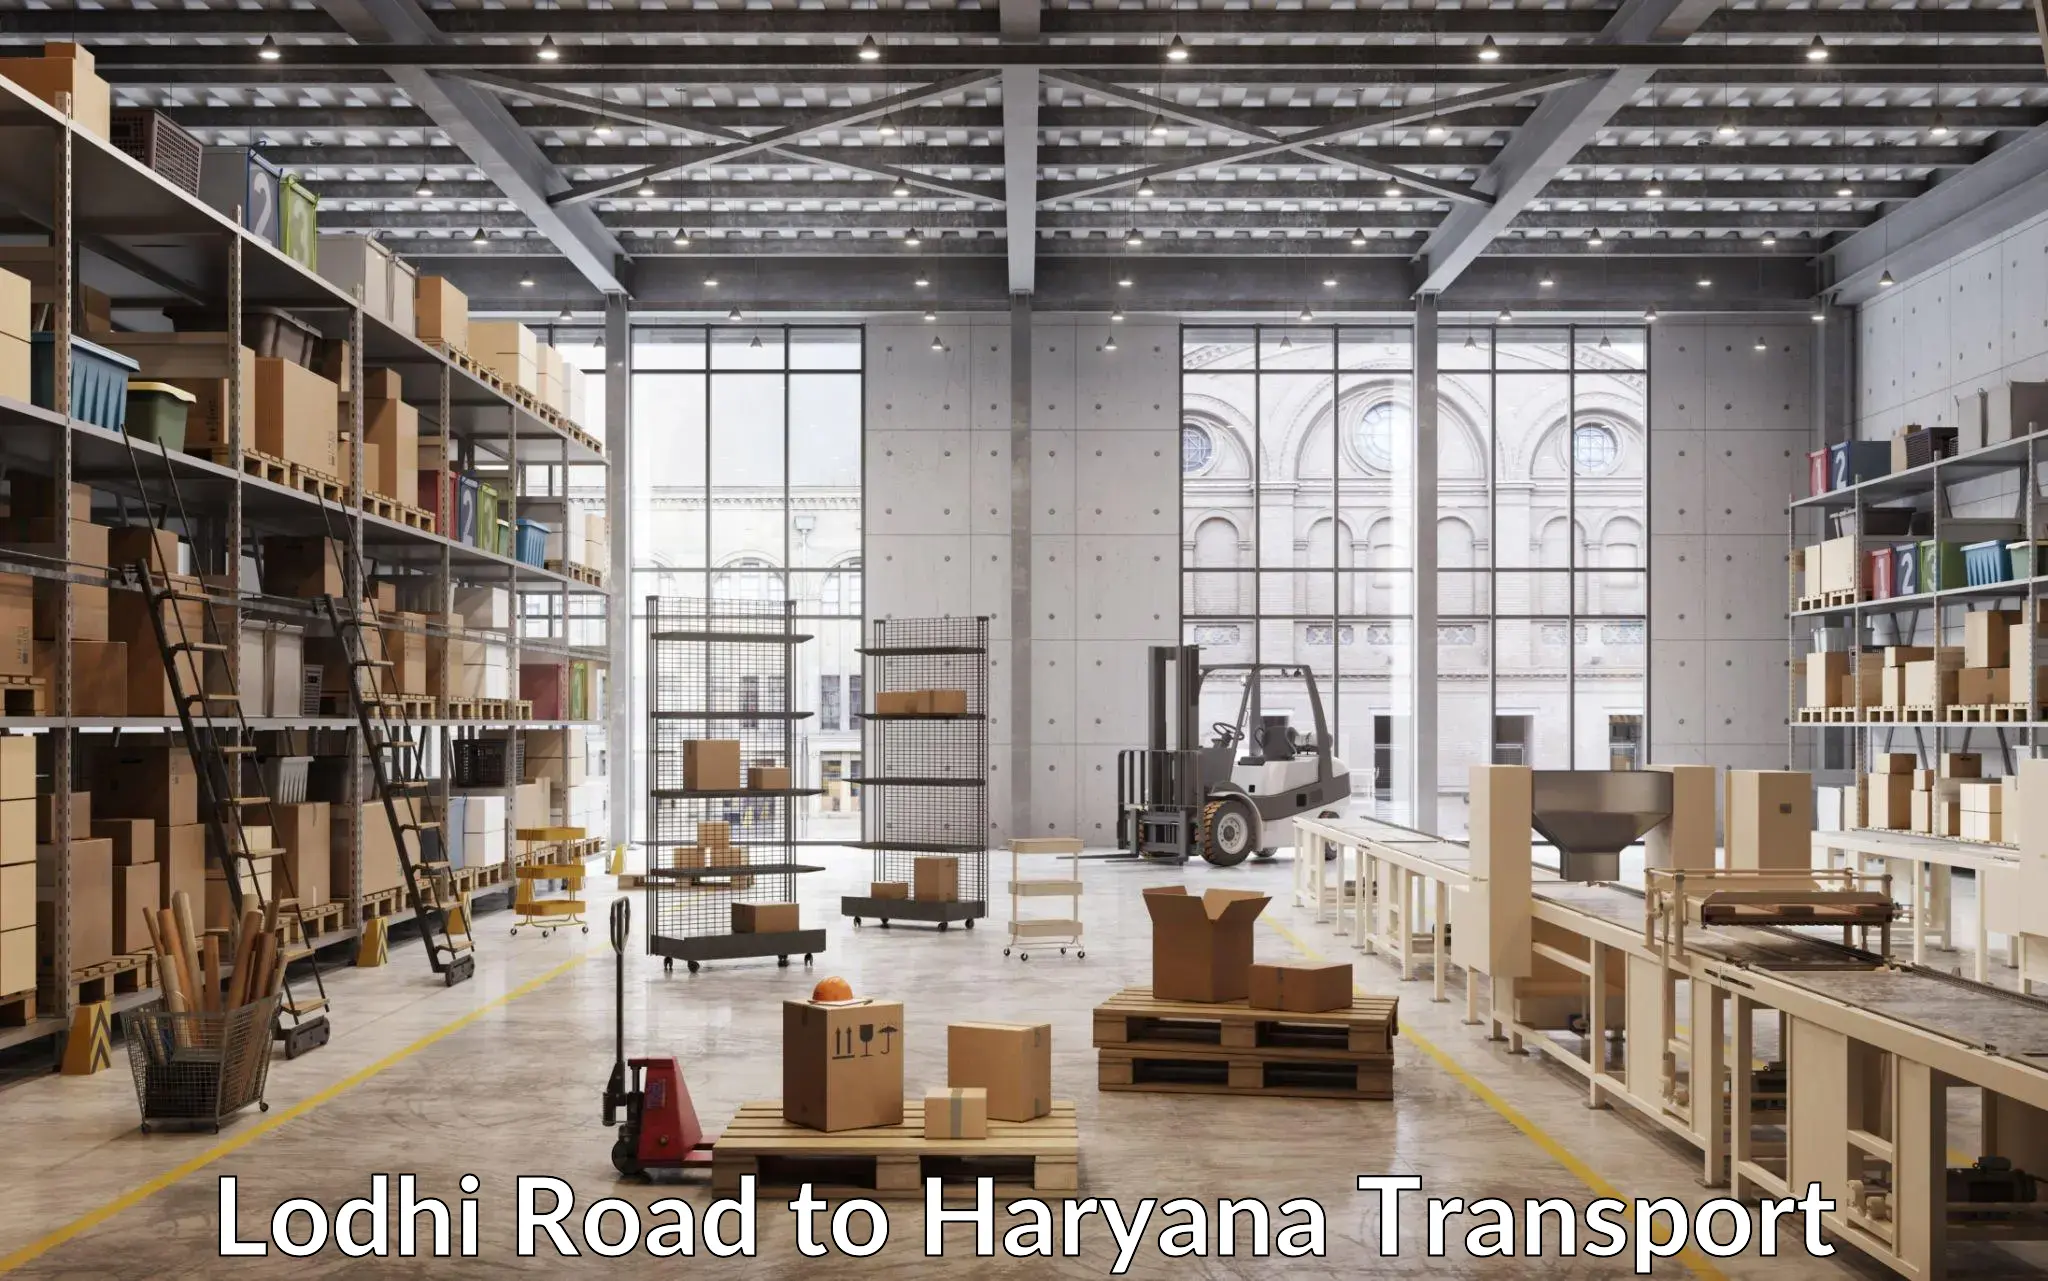 Container transport service Lodhi Road to Bilaspur Haryana